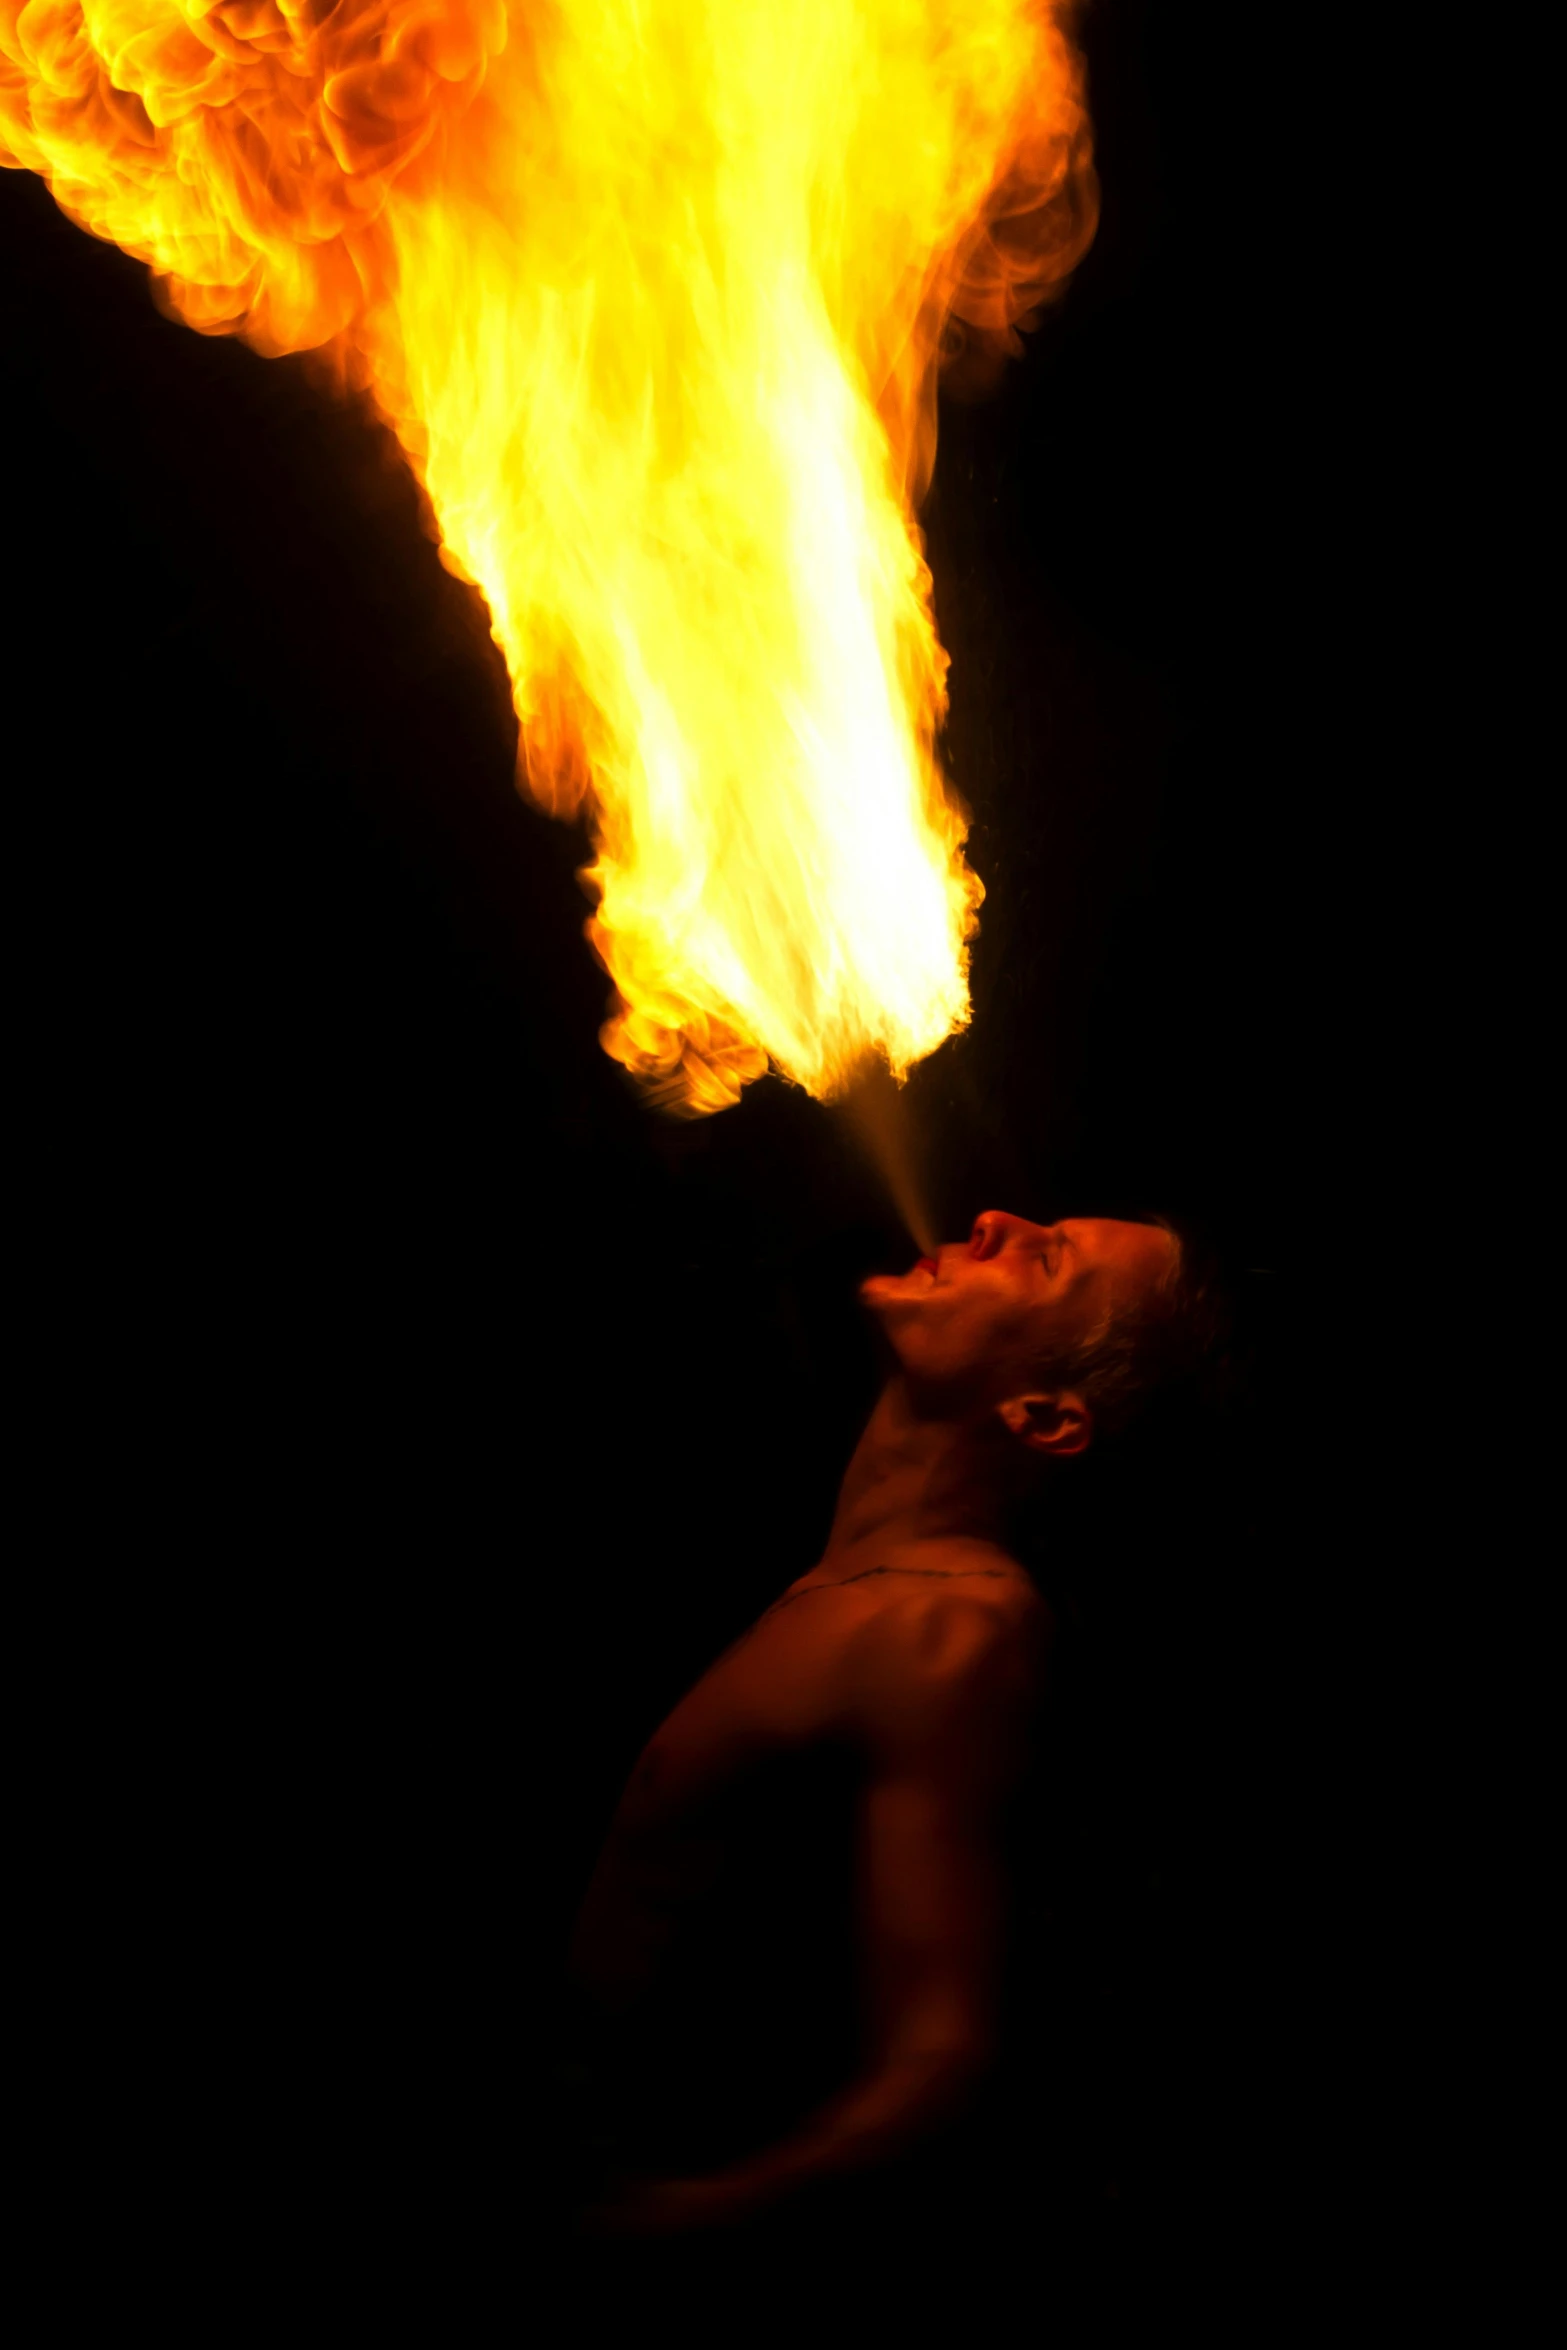 a man with fire coming out of his mouth, by Tony Szczudlo, fan favorite, photography”, ap news photograph, fire breathing. bowser